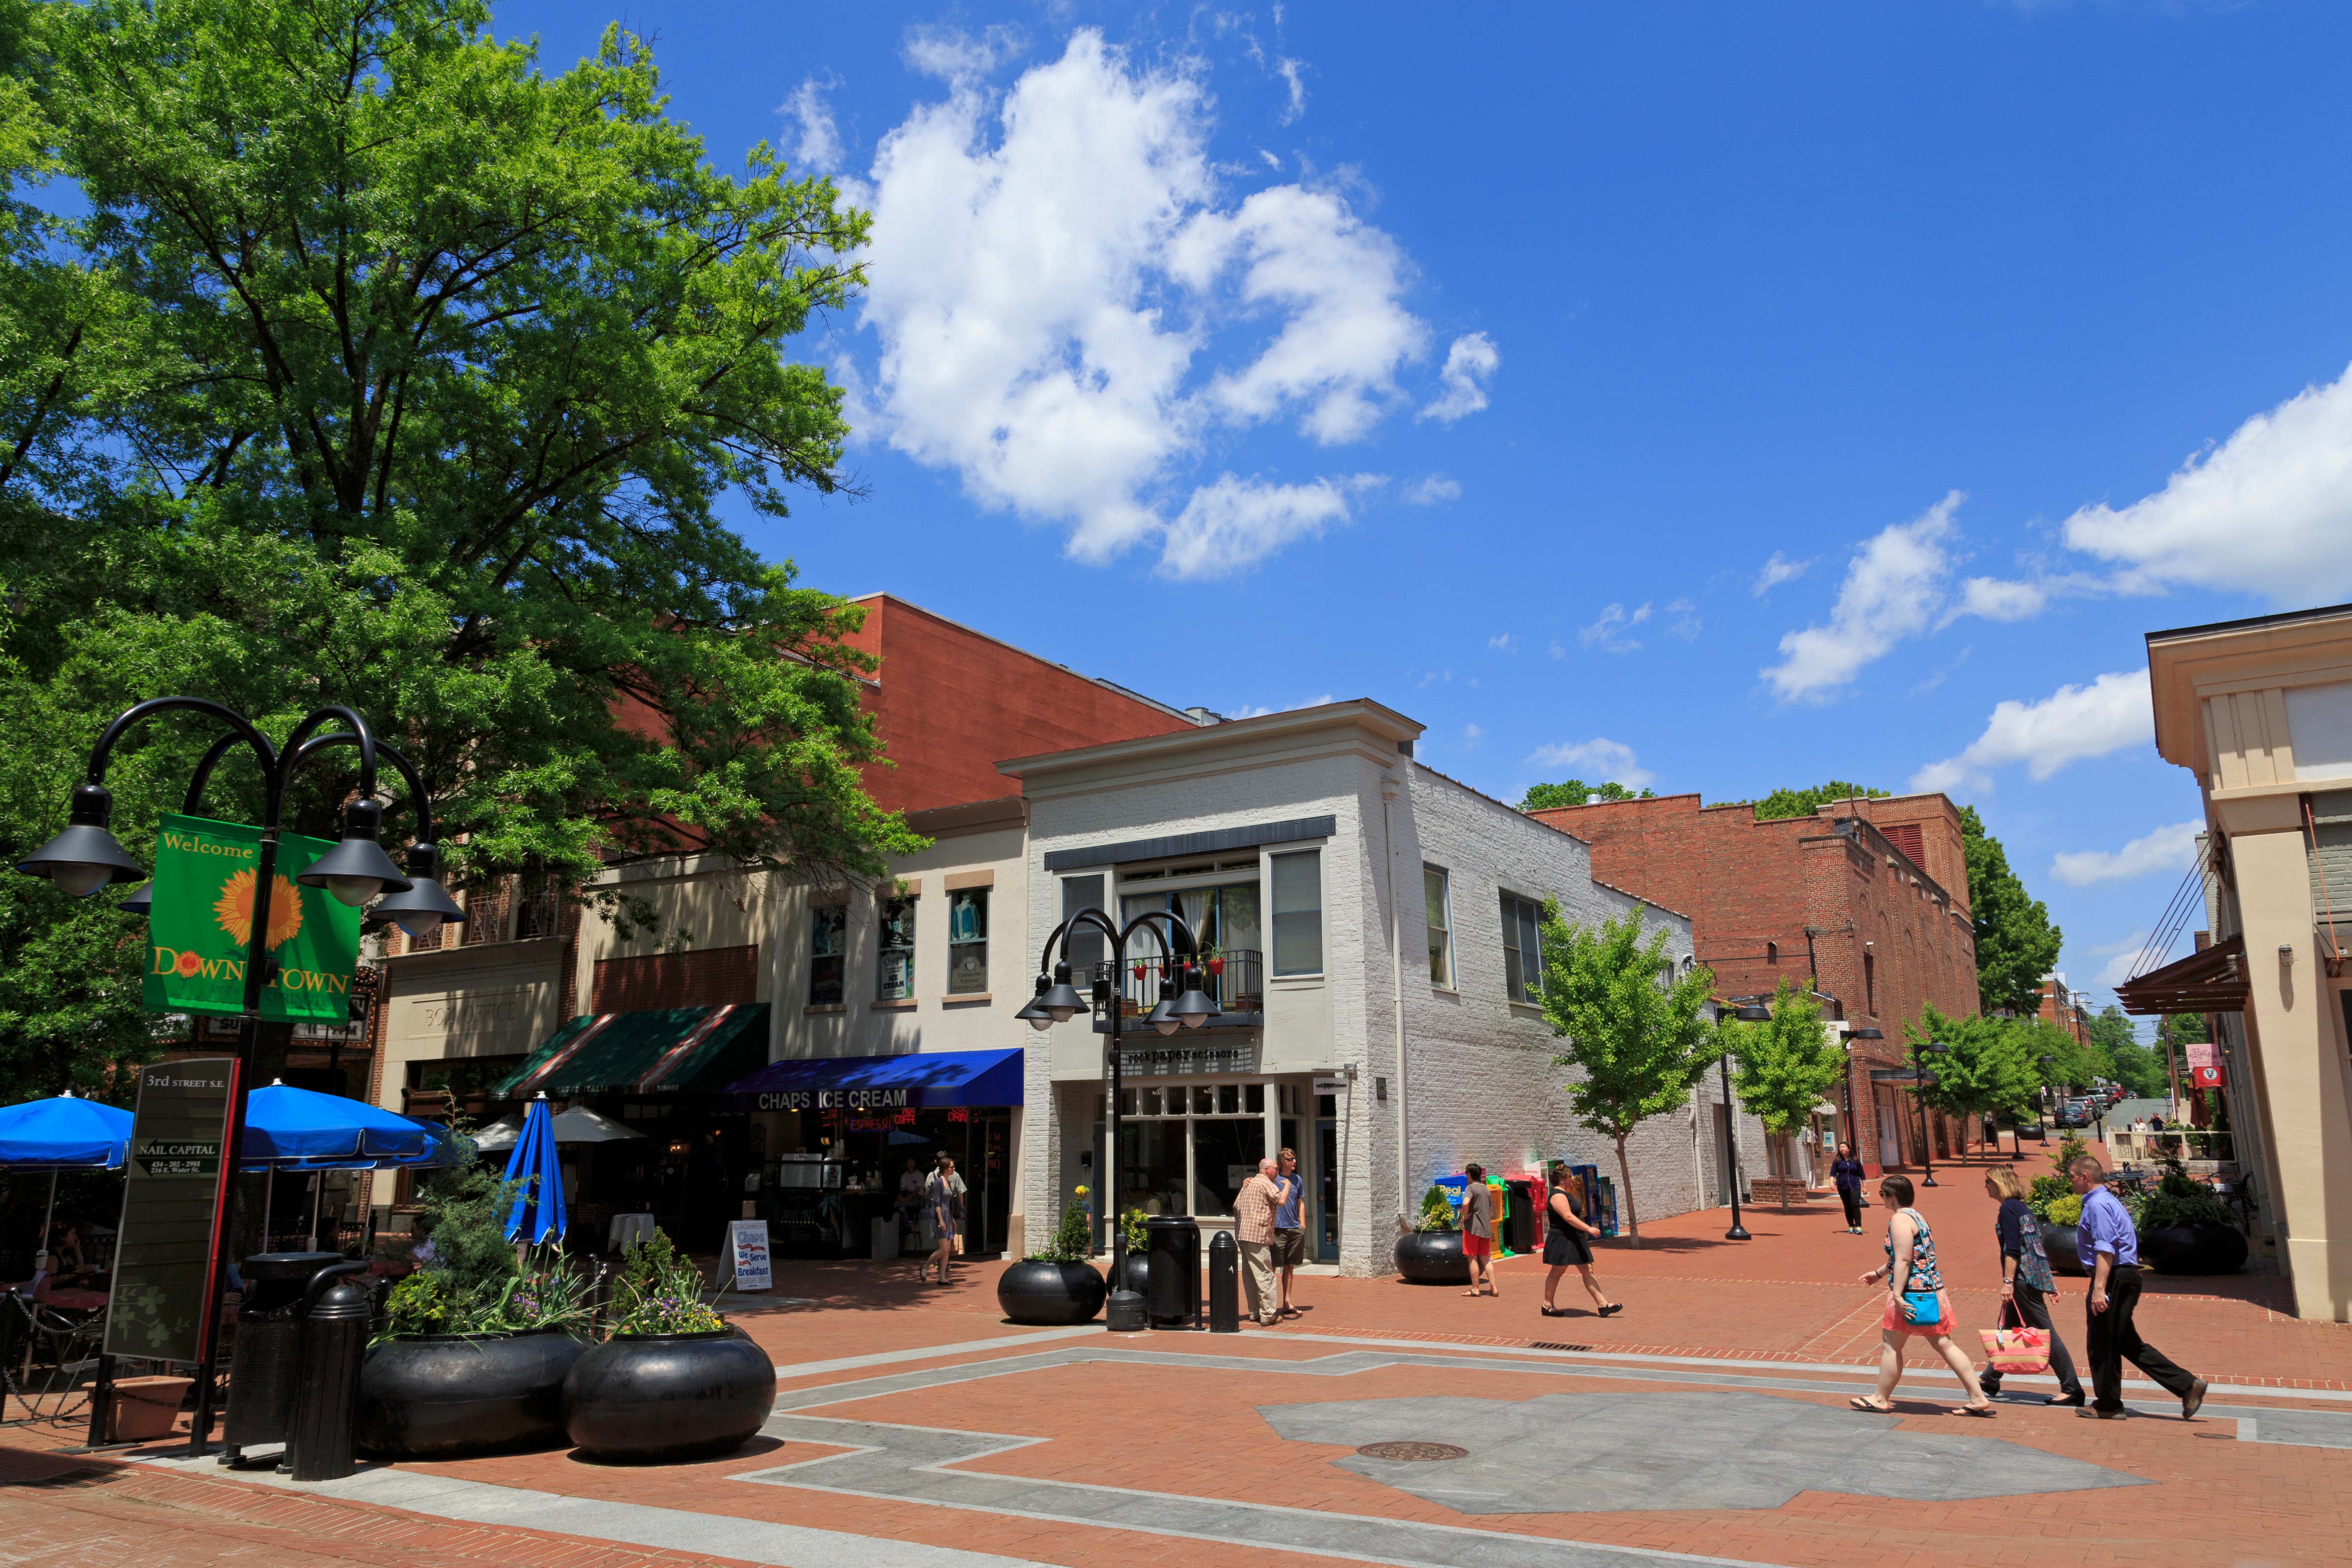 Historic Downtown Mall, Charlottesville, Virginia, U.S. (Richard Cummins&mdash;Getty Images/Lonely Planet Image)